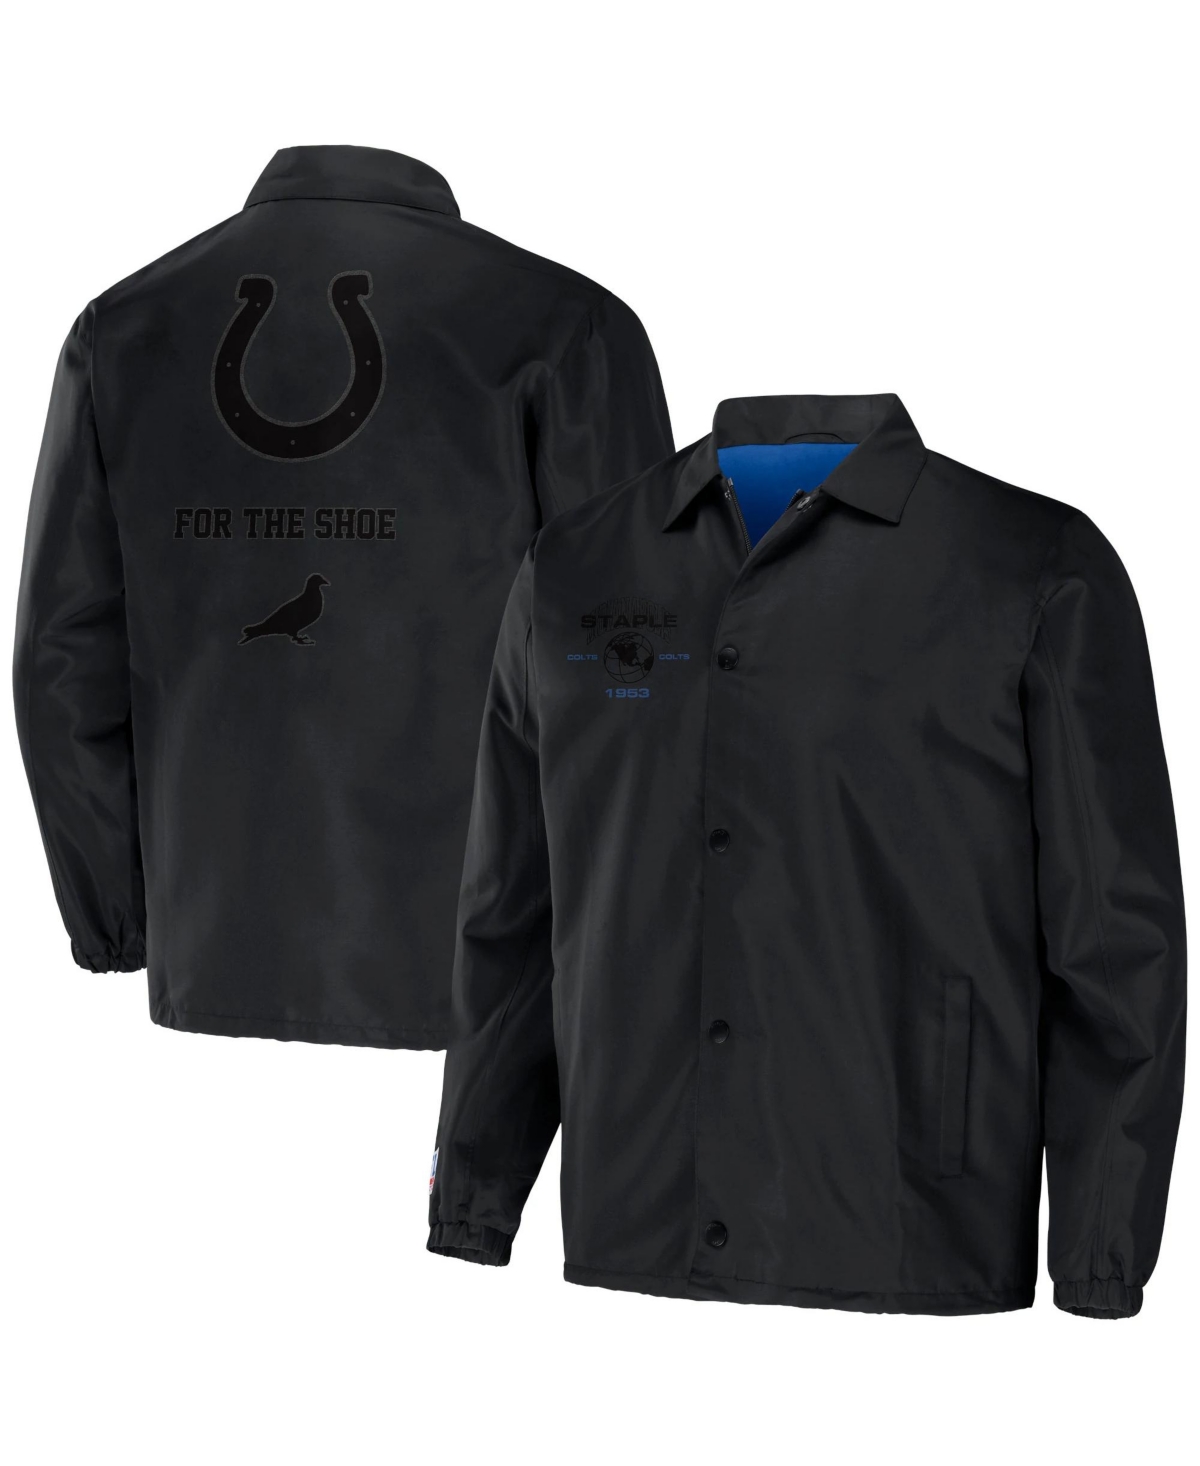 Nfl Properties Men's Nfl X Staple Black Indianapolis Colts Embroidered Nylon Jacket